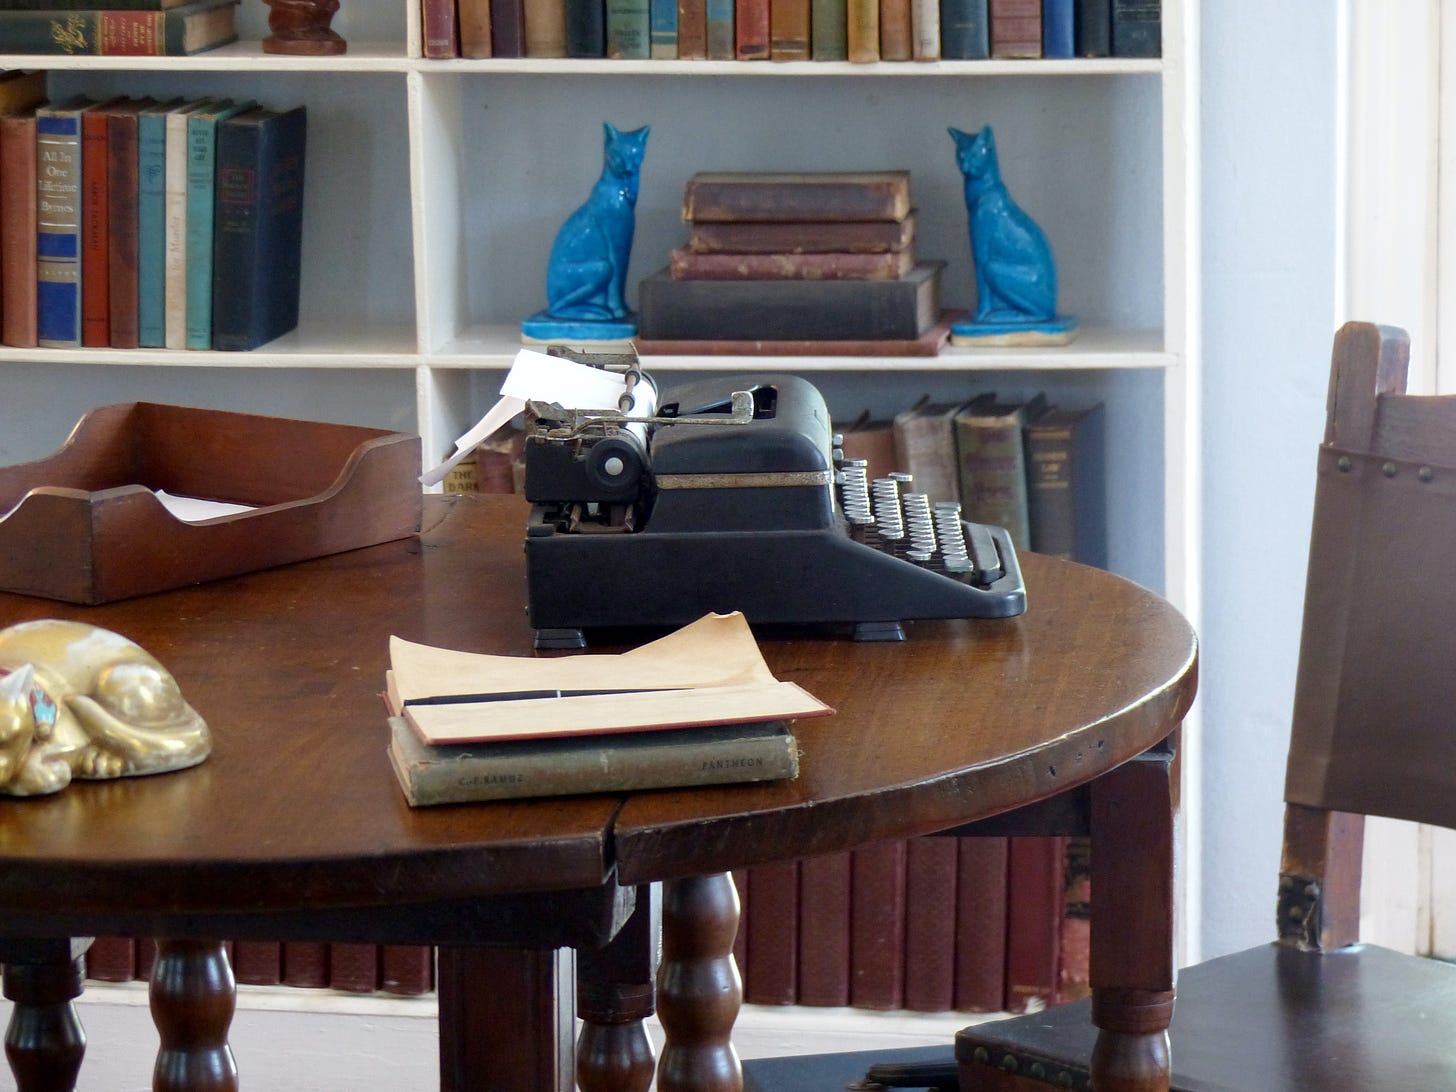 A black tyepwriter sits on a brown circular desk. Behind it is a bookshelf with books and two blue cat figurines.